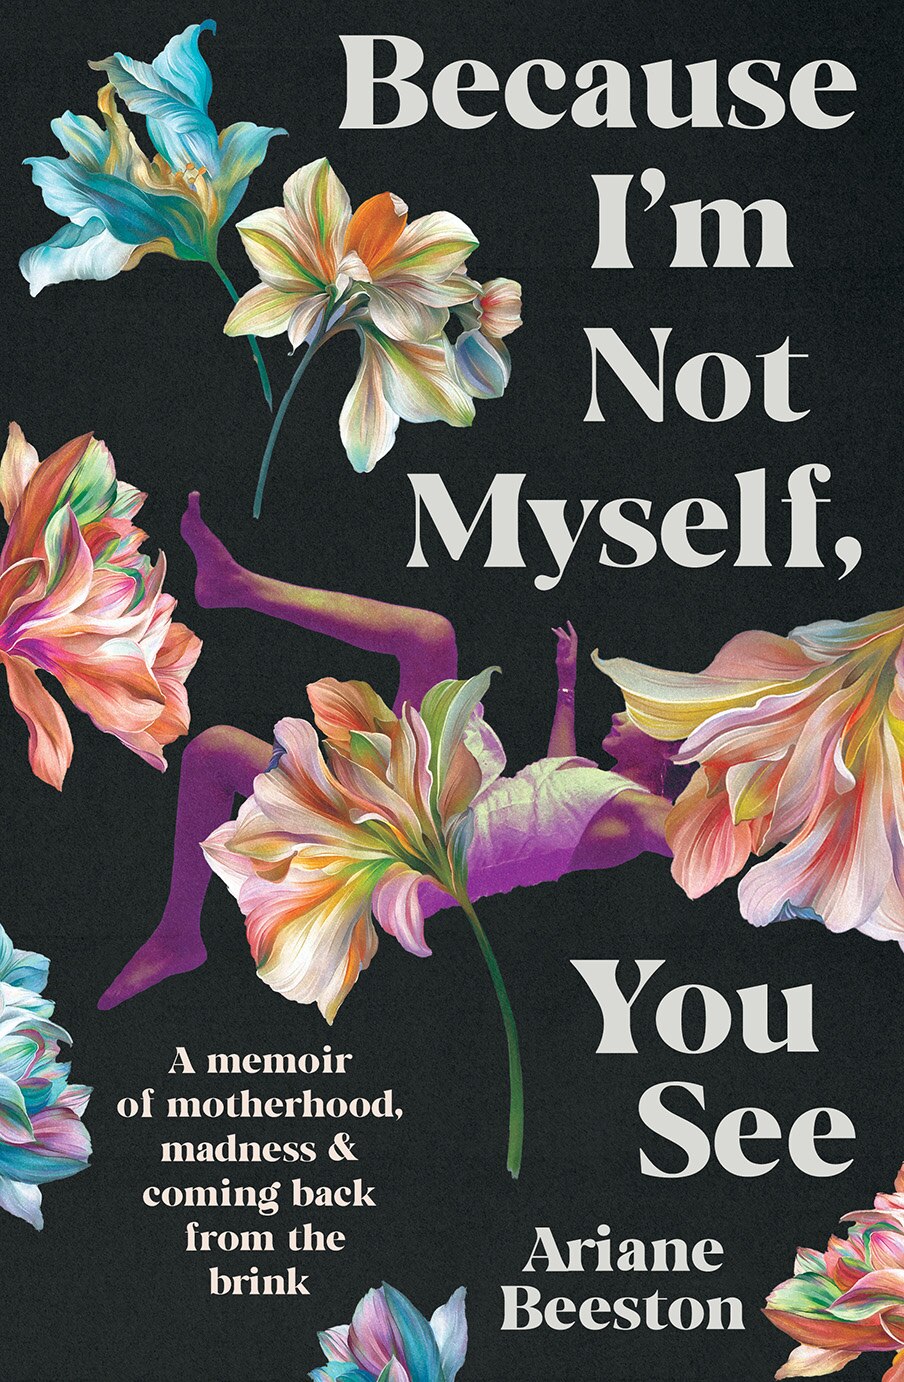 A mostly black cover with bright coloured lily flowers, a falling woman in the middle of them all